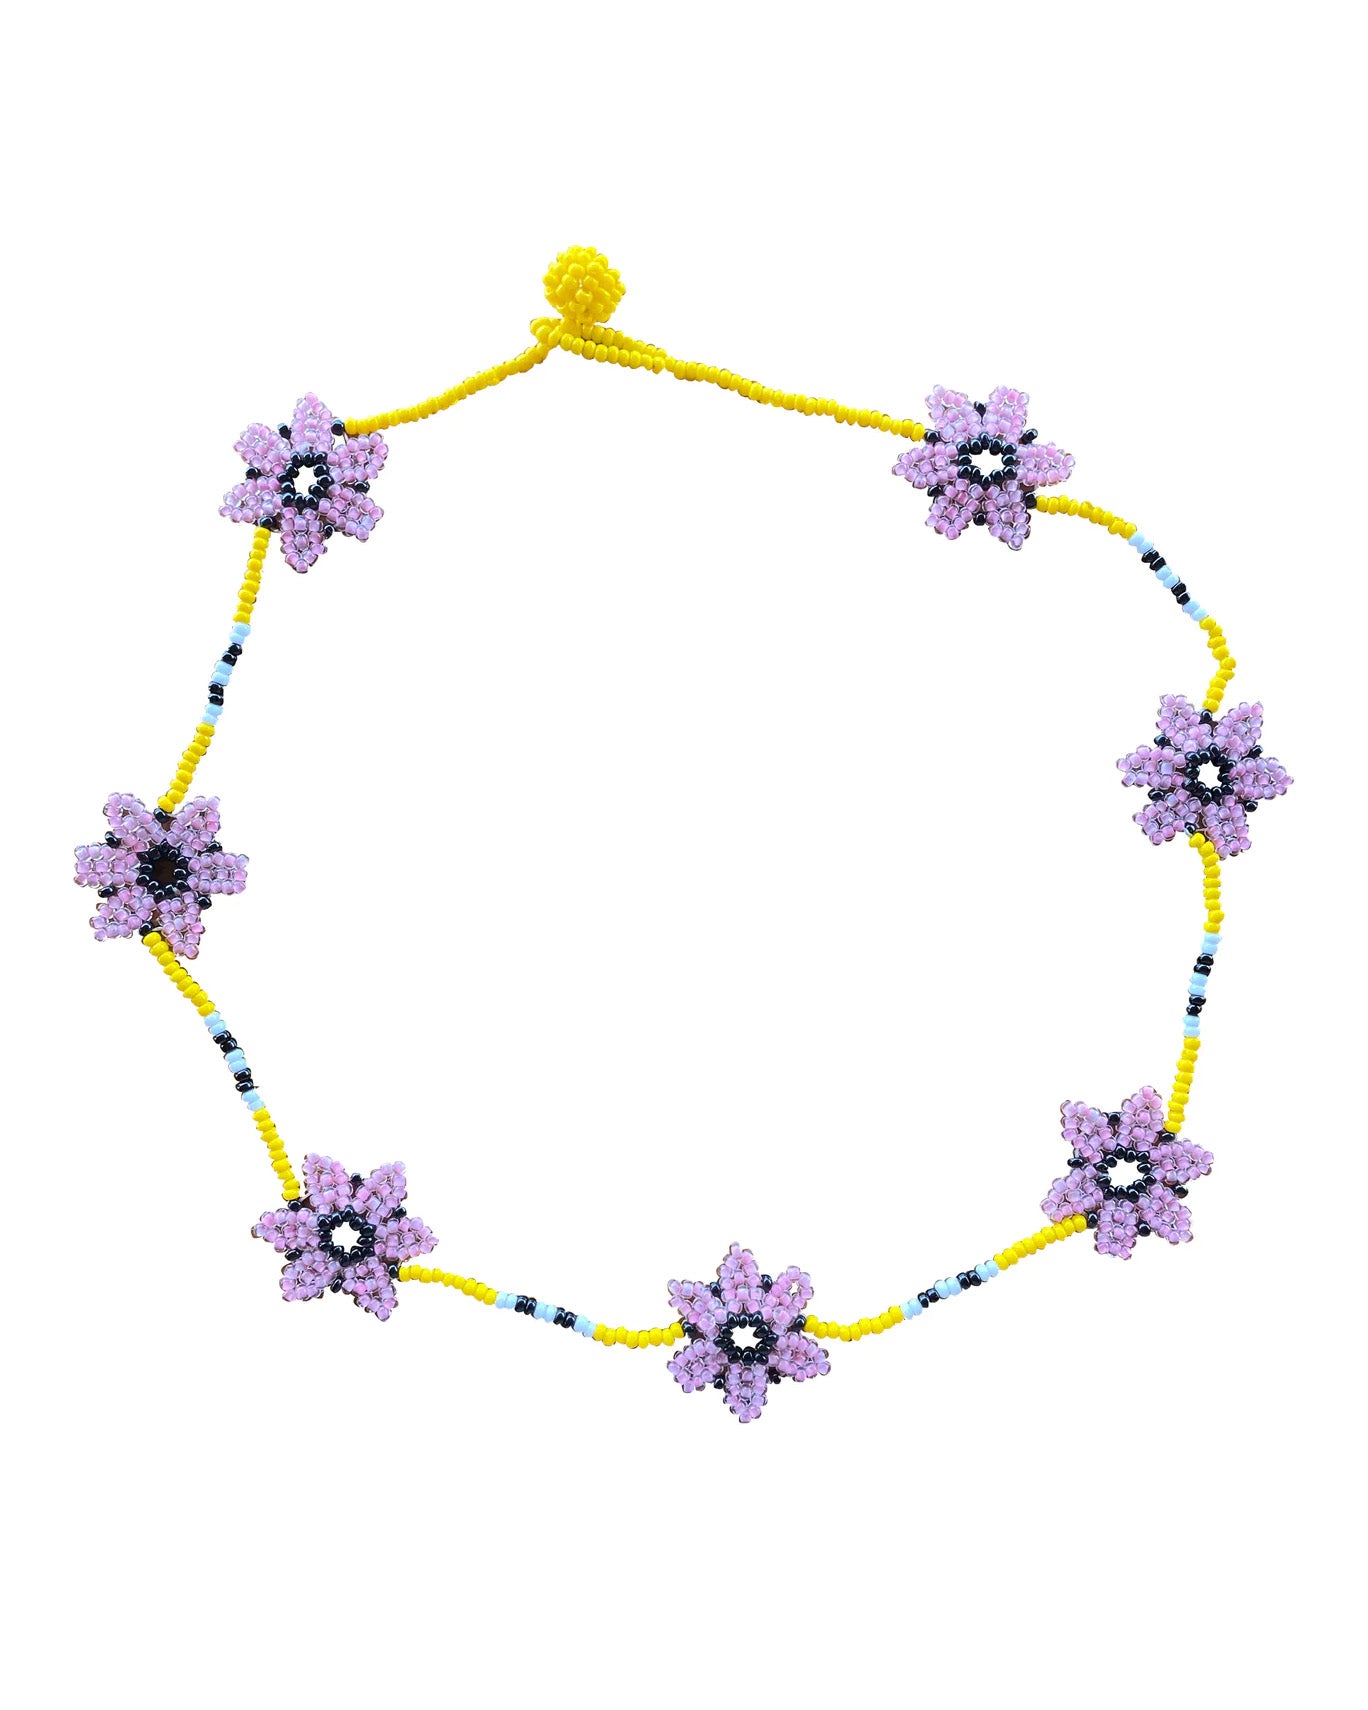 Fully beaded necklace with yellow beaded chain with light and dark blue accents and 7 lavender beaded flowers weaved throughout